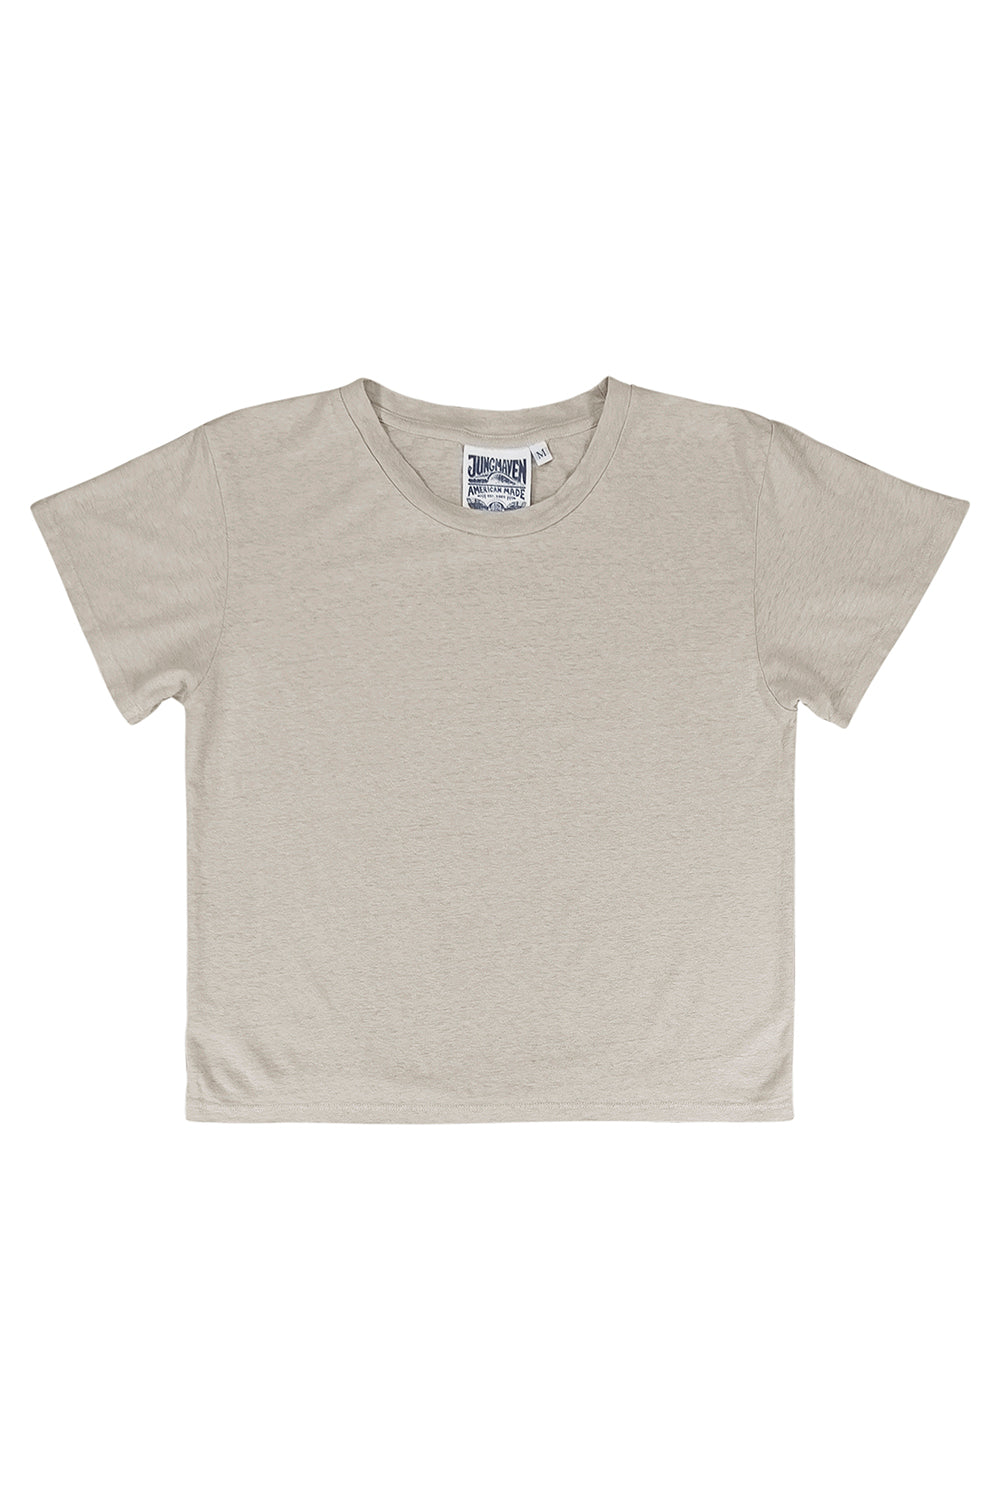 Cropped Lorel Tee | Jungmaven Hemp Clothing & Accessories / Color: Canvas